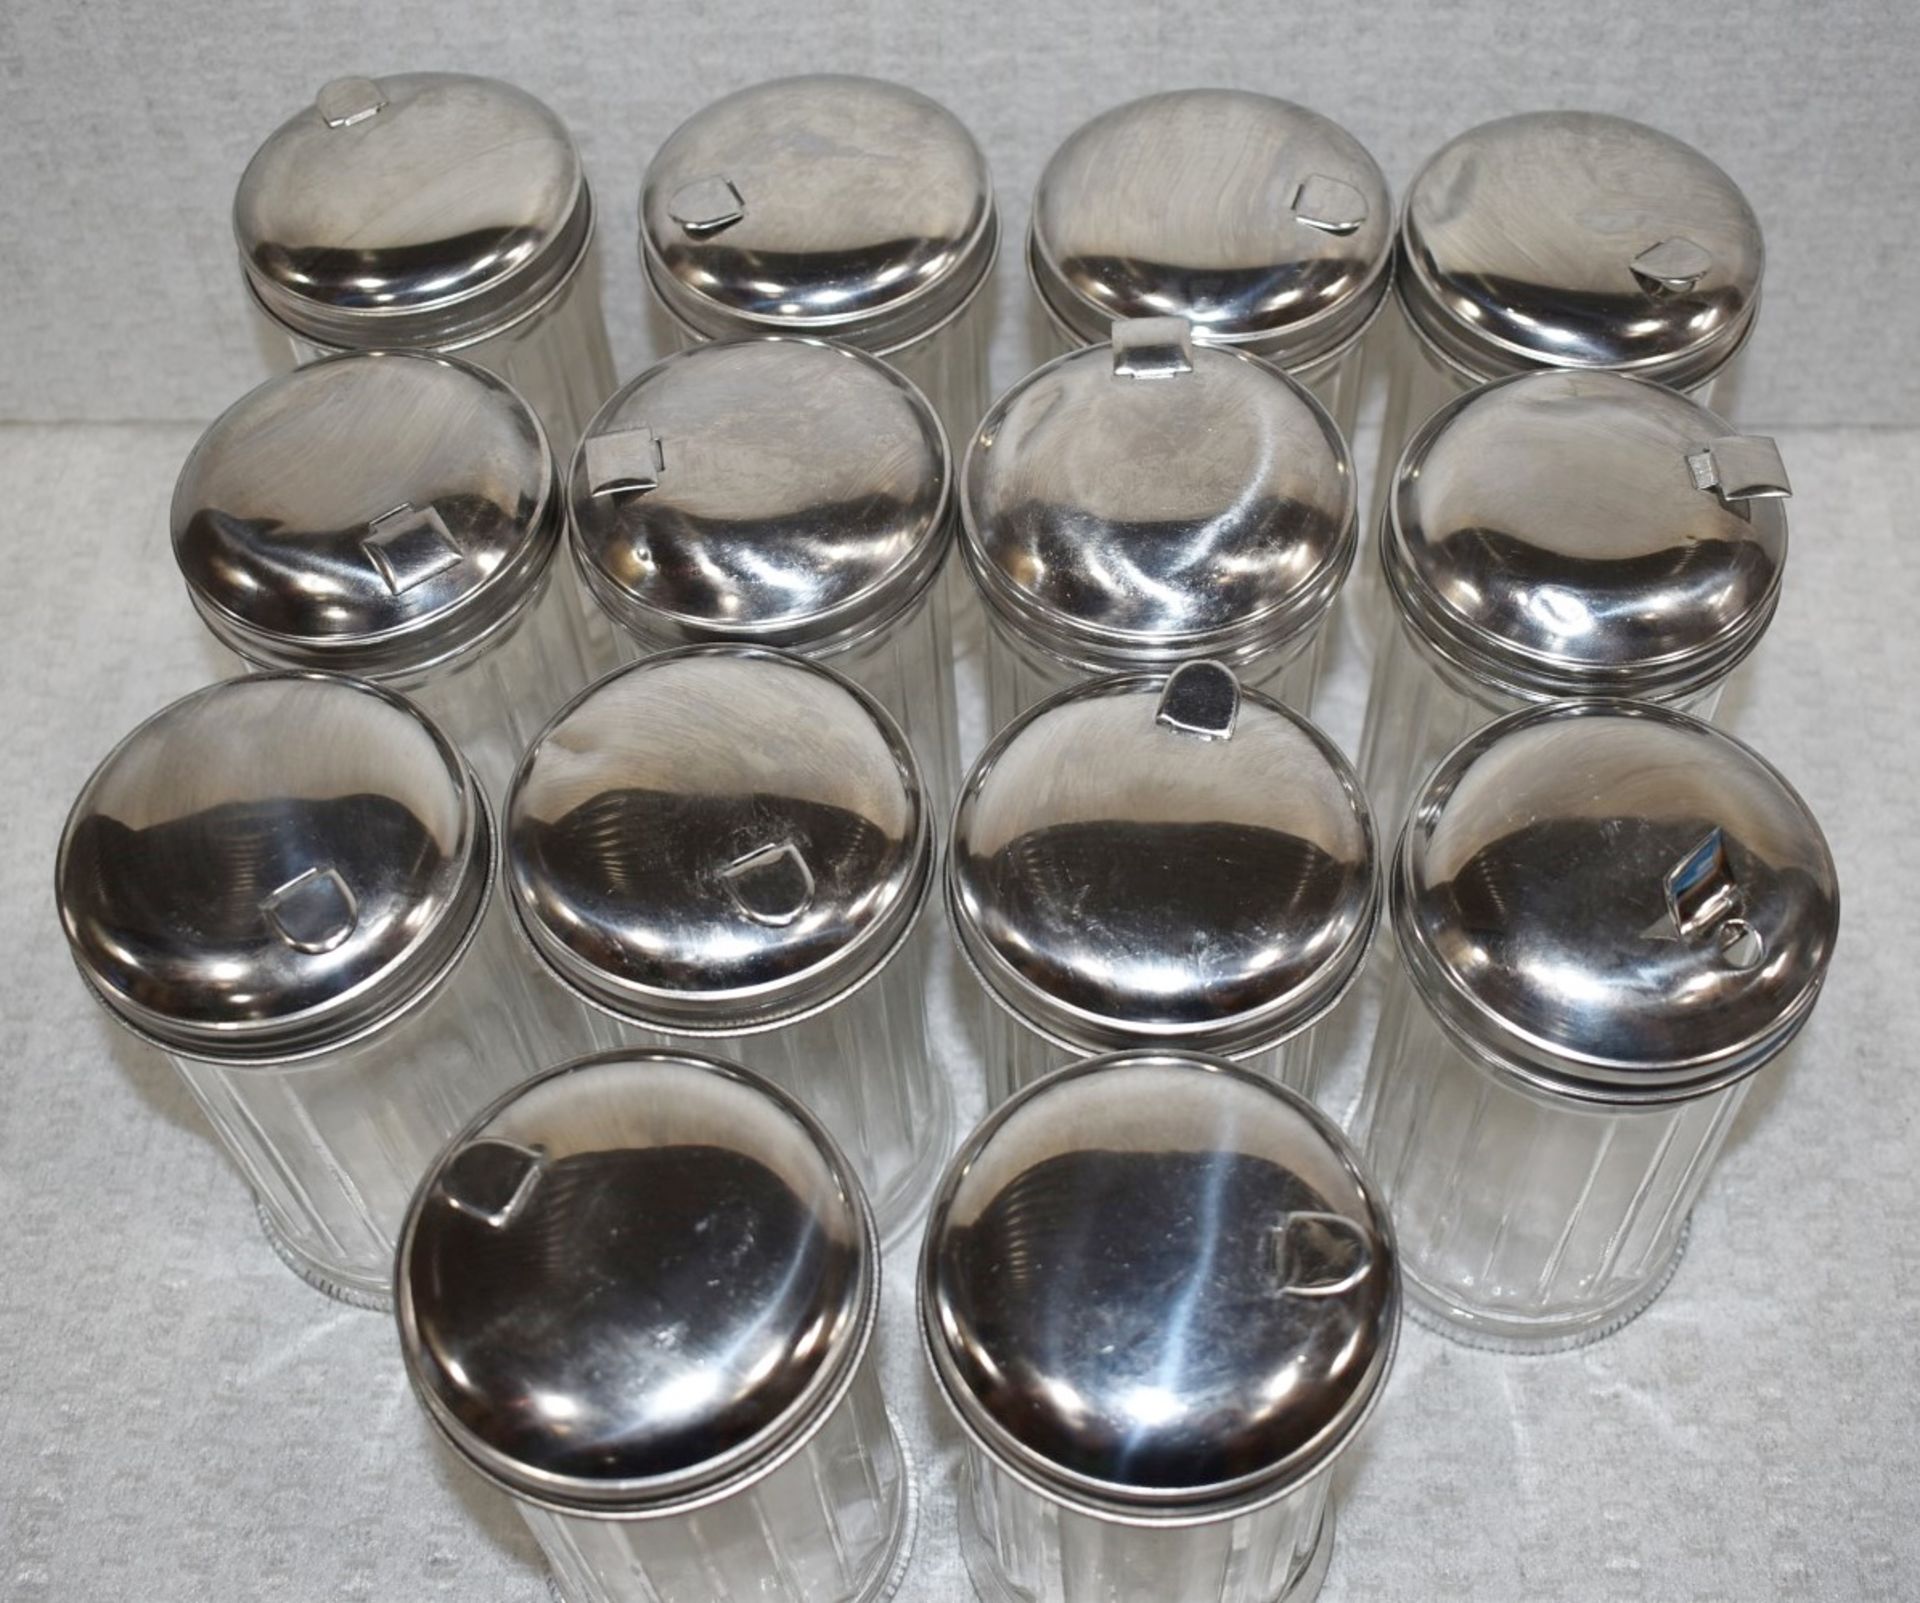 14 x Glass Sugar Dispensing Pots With Stainless Steel Lids - Suitable For Cafes or Restaurants - Image 4 of 8